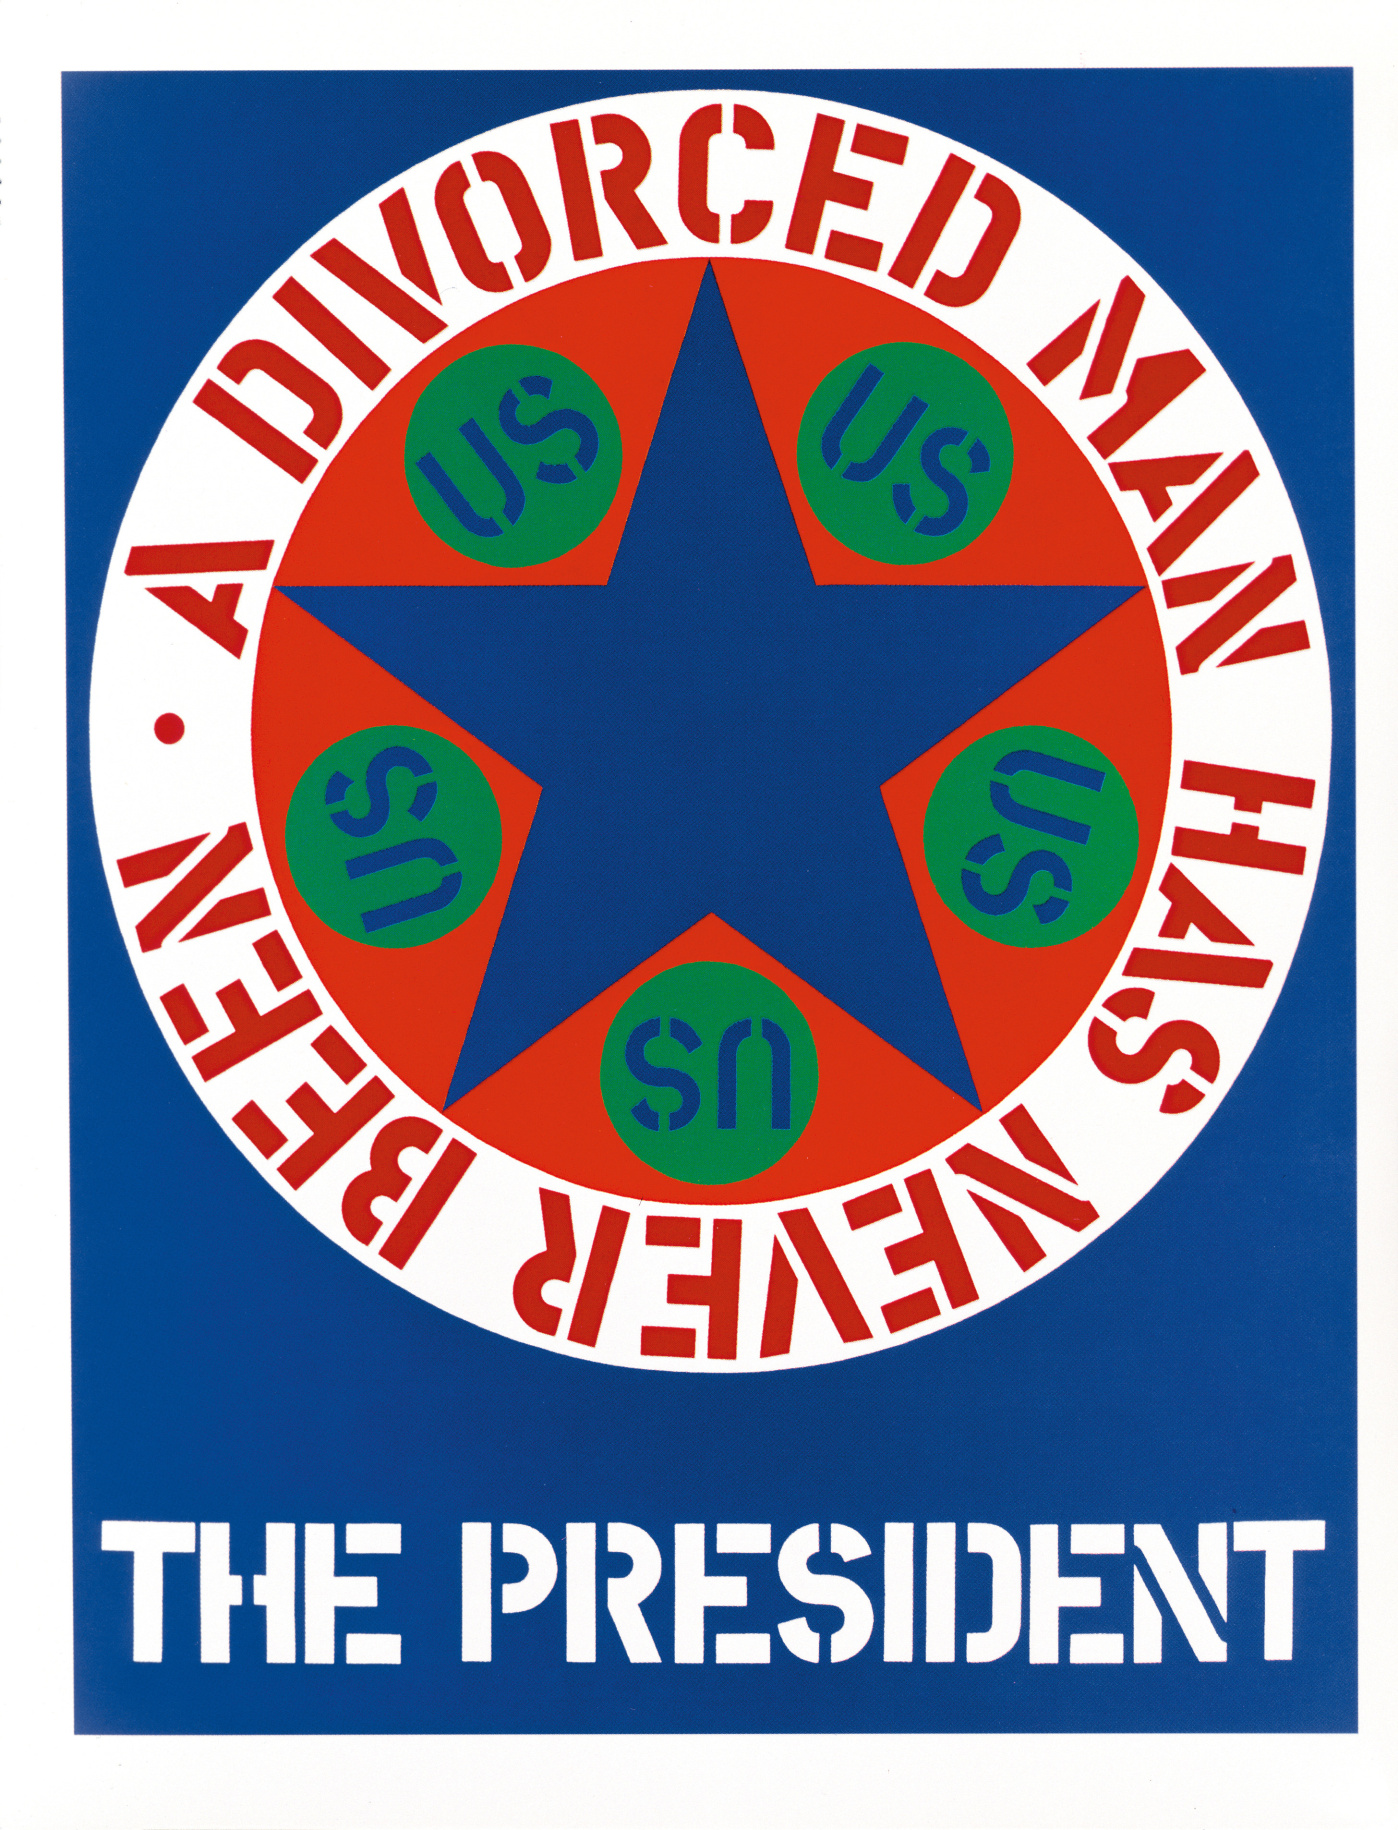 A Divorced Man Has Never Been the President is a 60 by 48 inch painting with a large circular design and text against a blue ground. Painted across the bottom of the work, in white stenciled letters, is &quot;The President.&quot; Above this is a large red circle containing a blue star. Five smaller green circles, each with &quot;US&quot; in blue letters, have been painted between the arms of each star. A white ring surrounding the red circle contains the text &quot;A divorced man has never been&quot; painted in red stenciled letters.